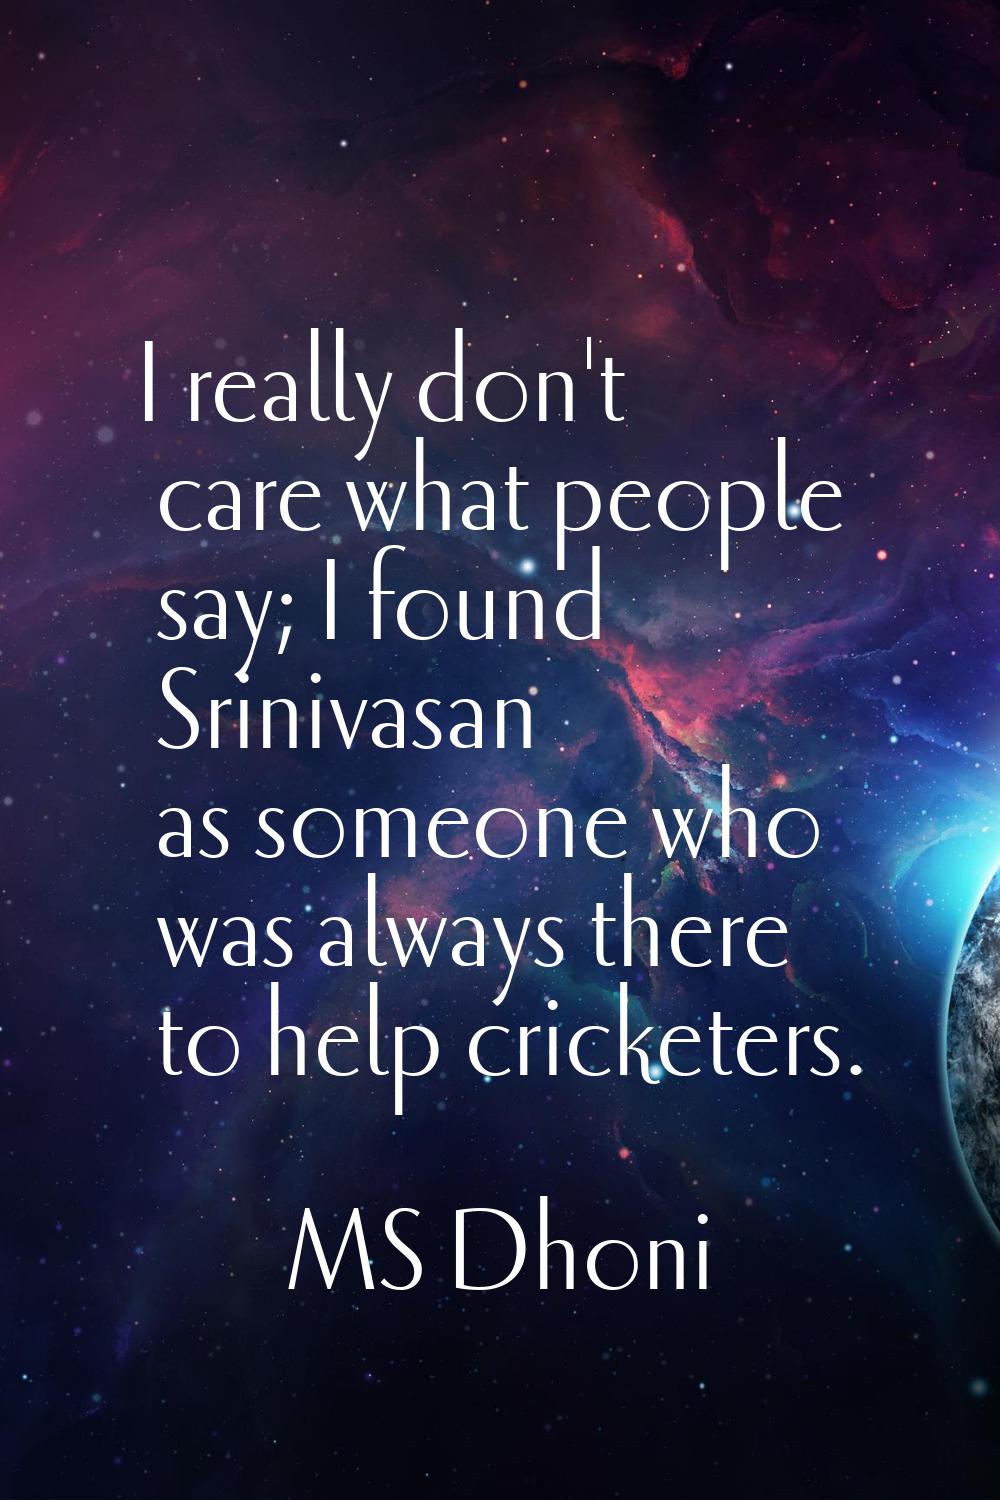 I really don't care what people say; I found Srinivasan as someone who was always there to help cri